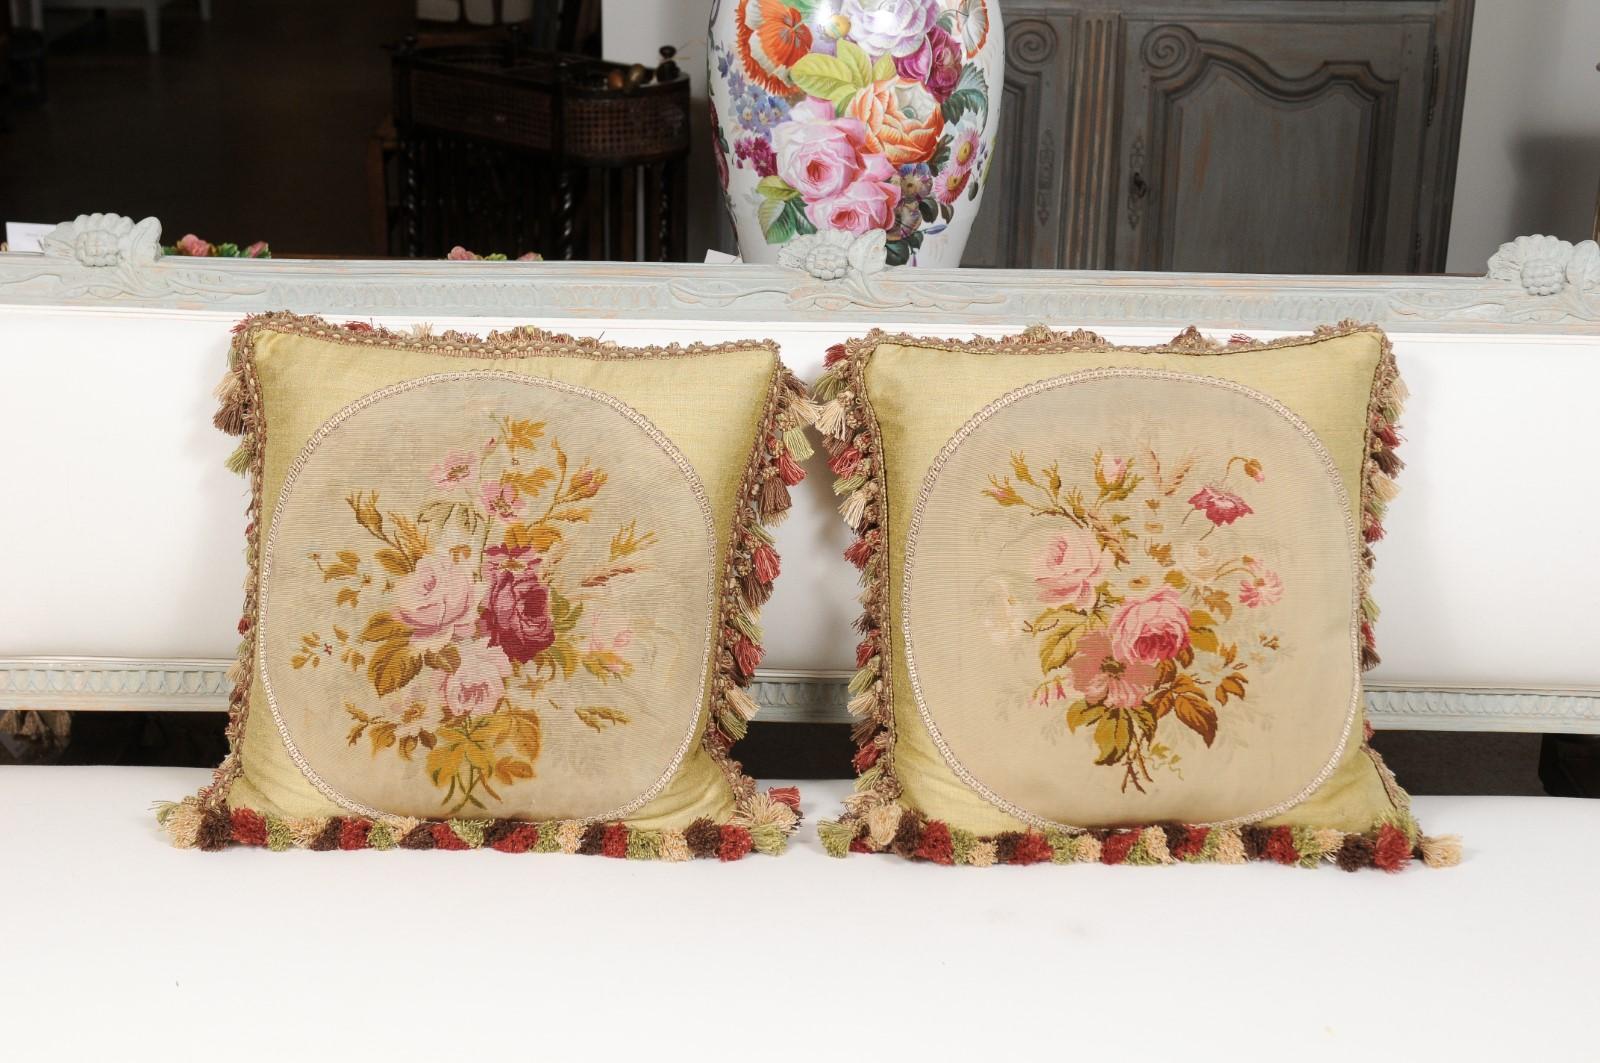 Two French Aubusson tapestry pillows from the 19th century, with floral décor and tassels, priced and sold separately. Born in central France during the 19th century, each of these pillows is made of a delicate Aubusson tapestry, set inside an oval